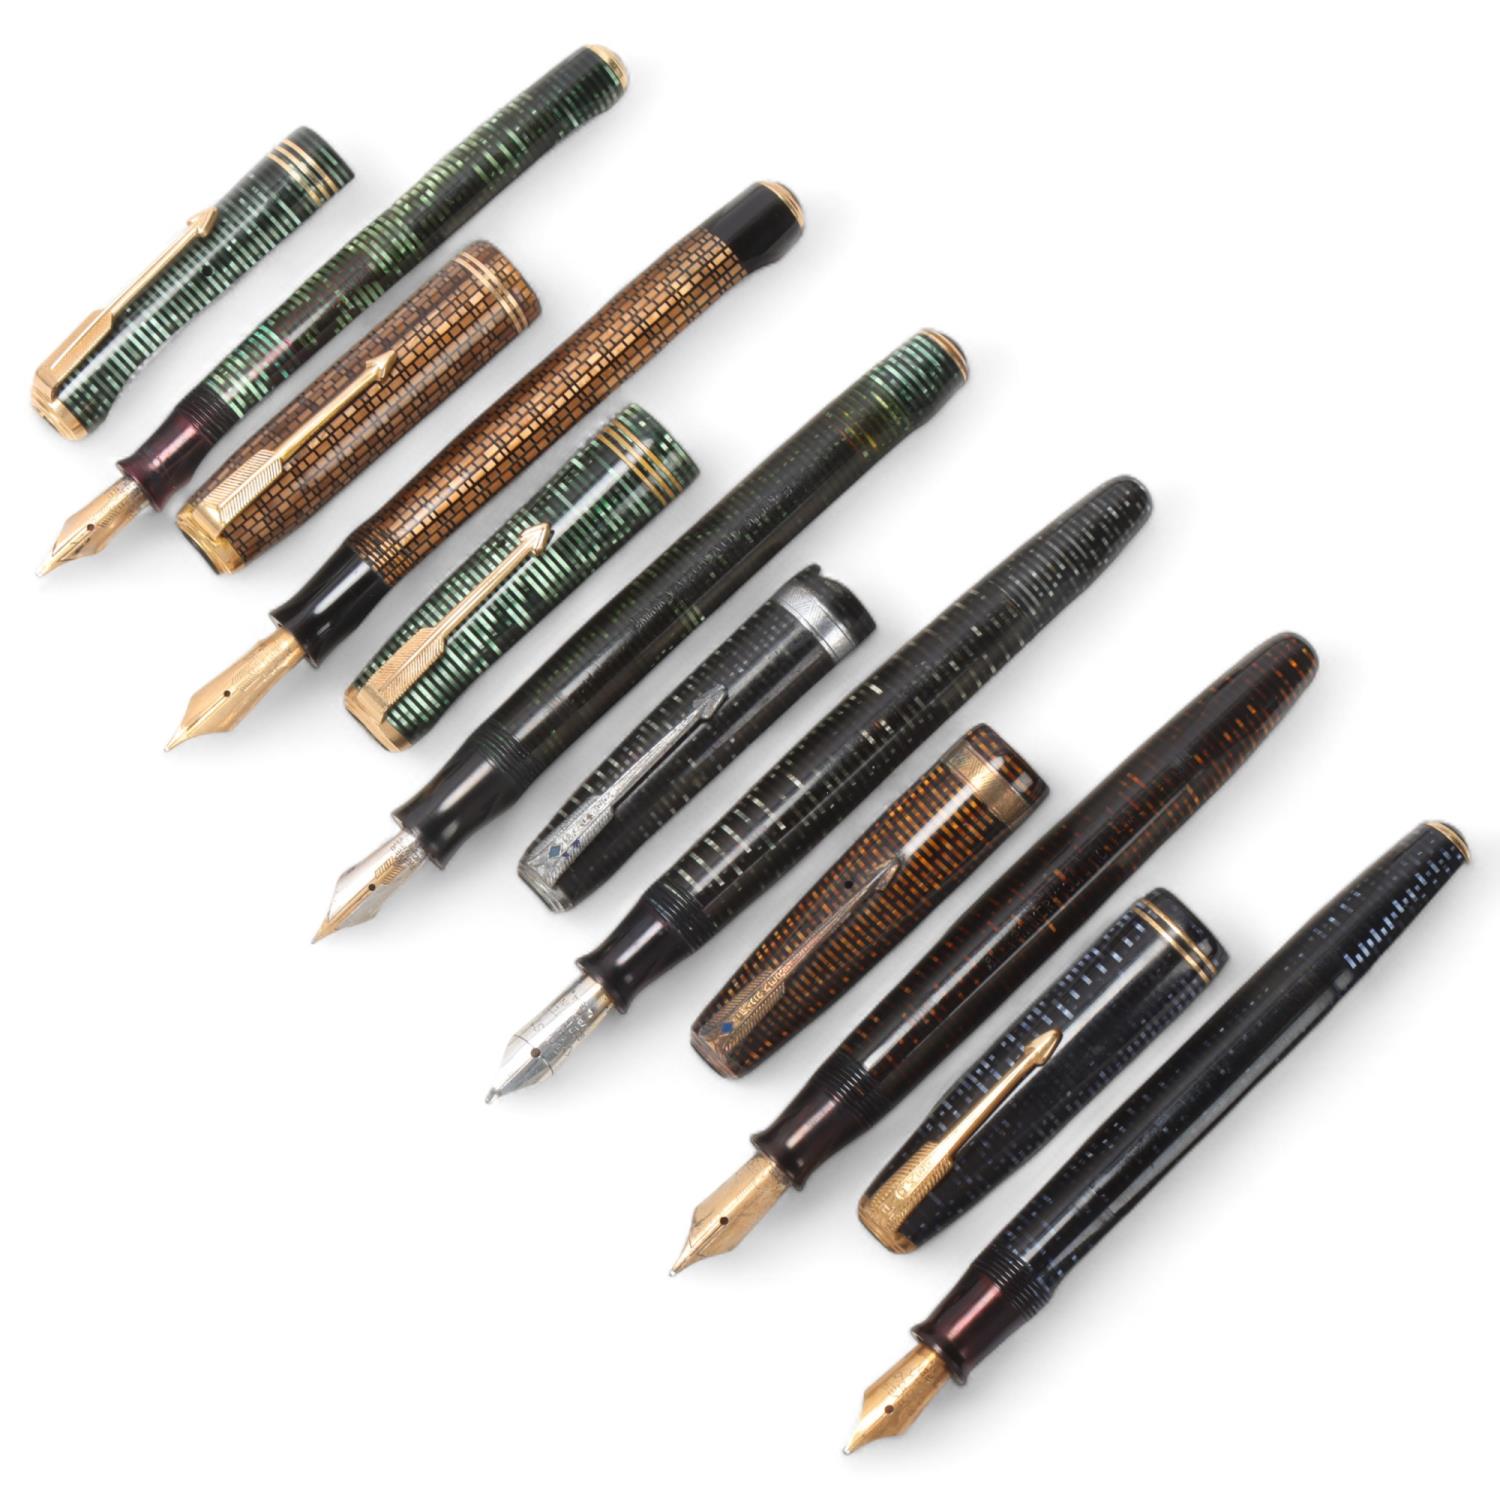 6 vintage Parker fountain pens, 5 with 14ct nib, all with sprung pump fill action "Vacumatic" and